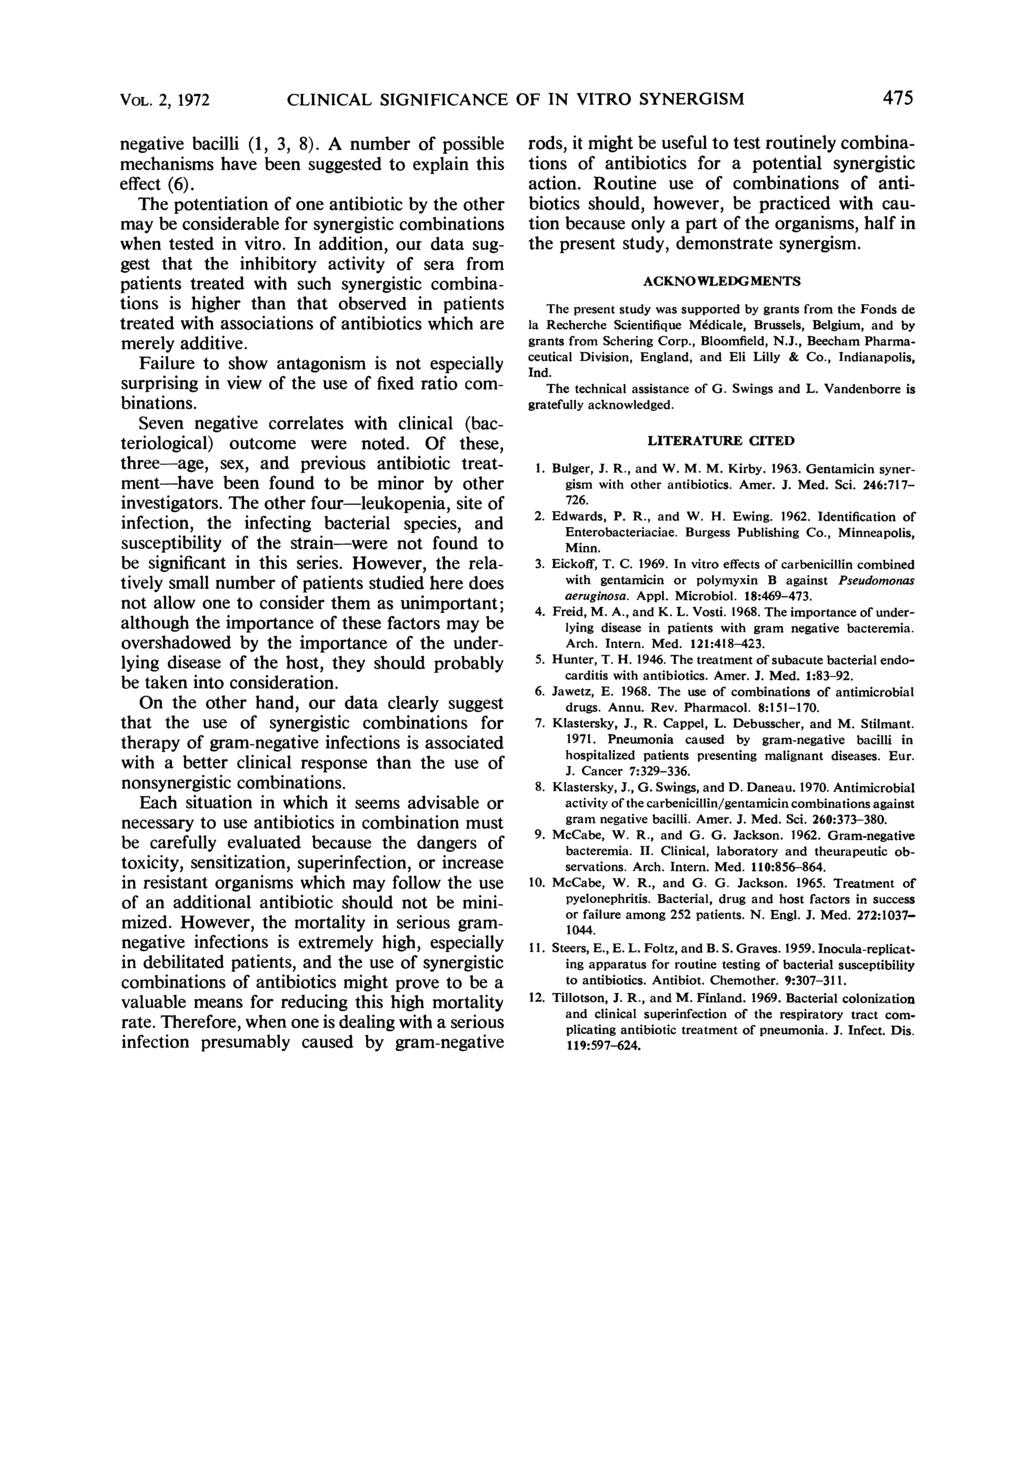 VOL. 2, 1972 CLINICAL SIGNIFICANCE OF IN VITO SYNEGISM 475 negative bacilli (1, 3, 8). A number of possible mechanisms have been suggested to explain this effect (6).